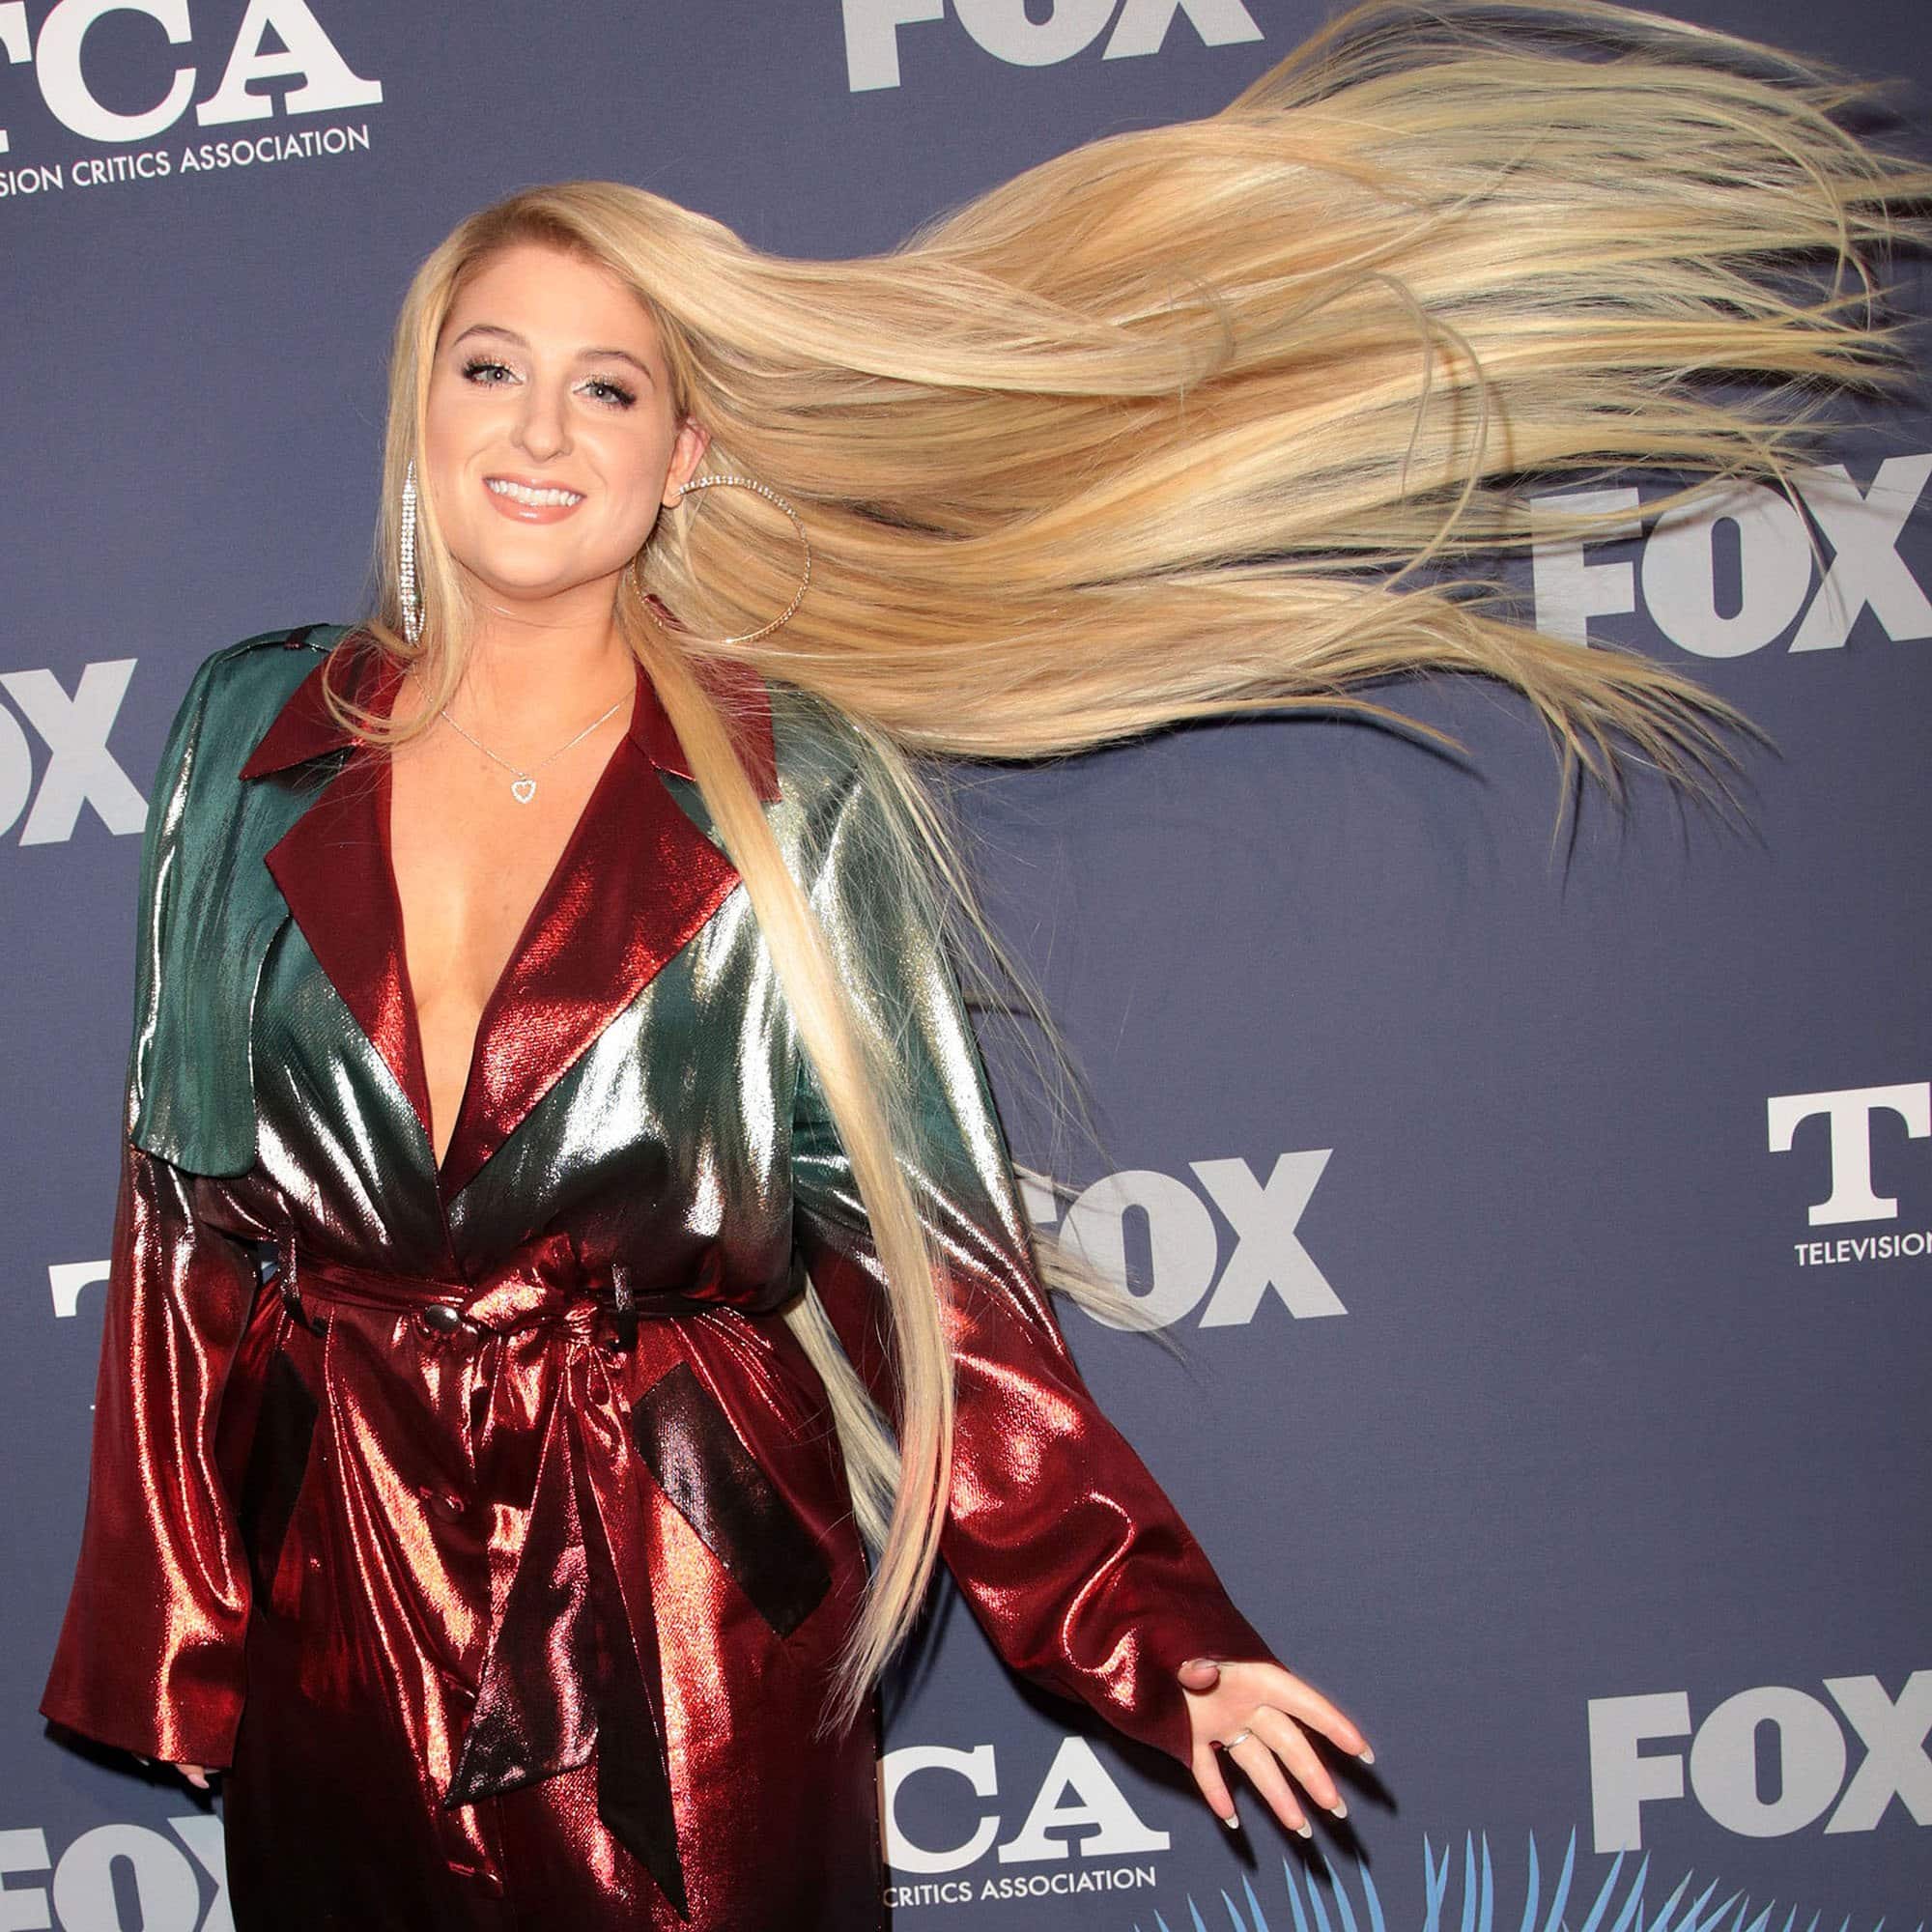 Meghan Trainor flips her long shiny blonde hair at the 2018 TCA Summer Press Tour